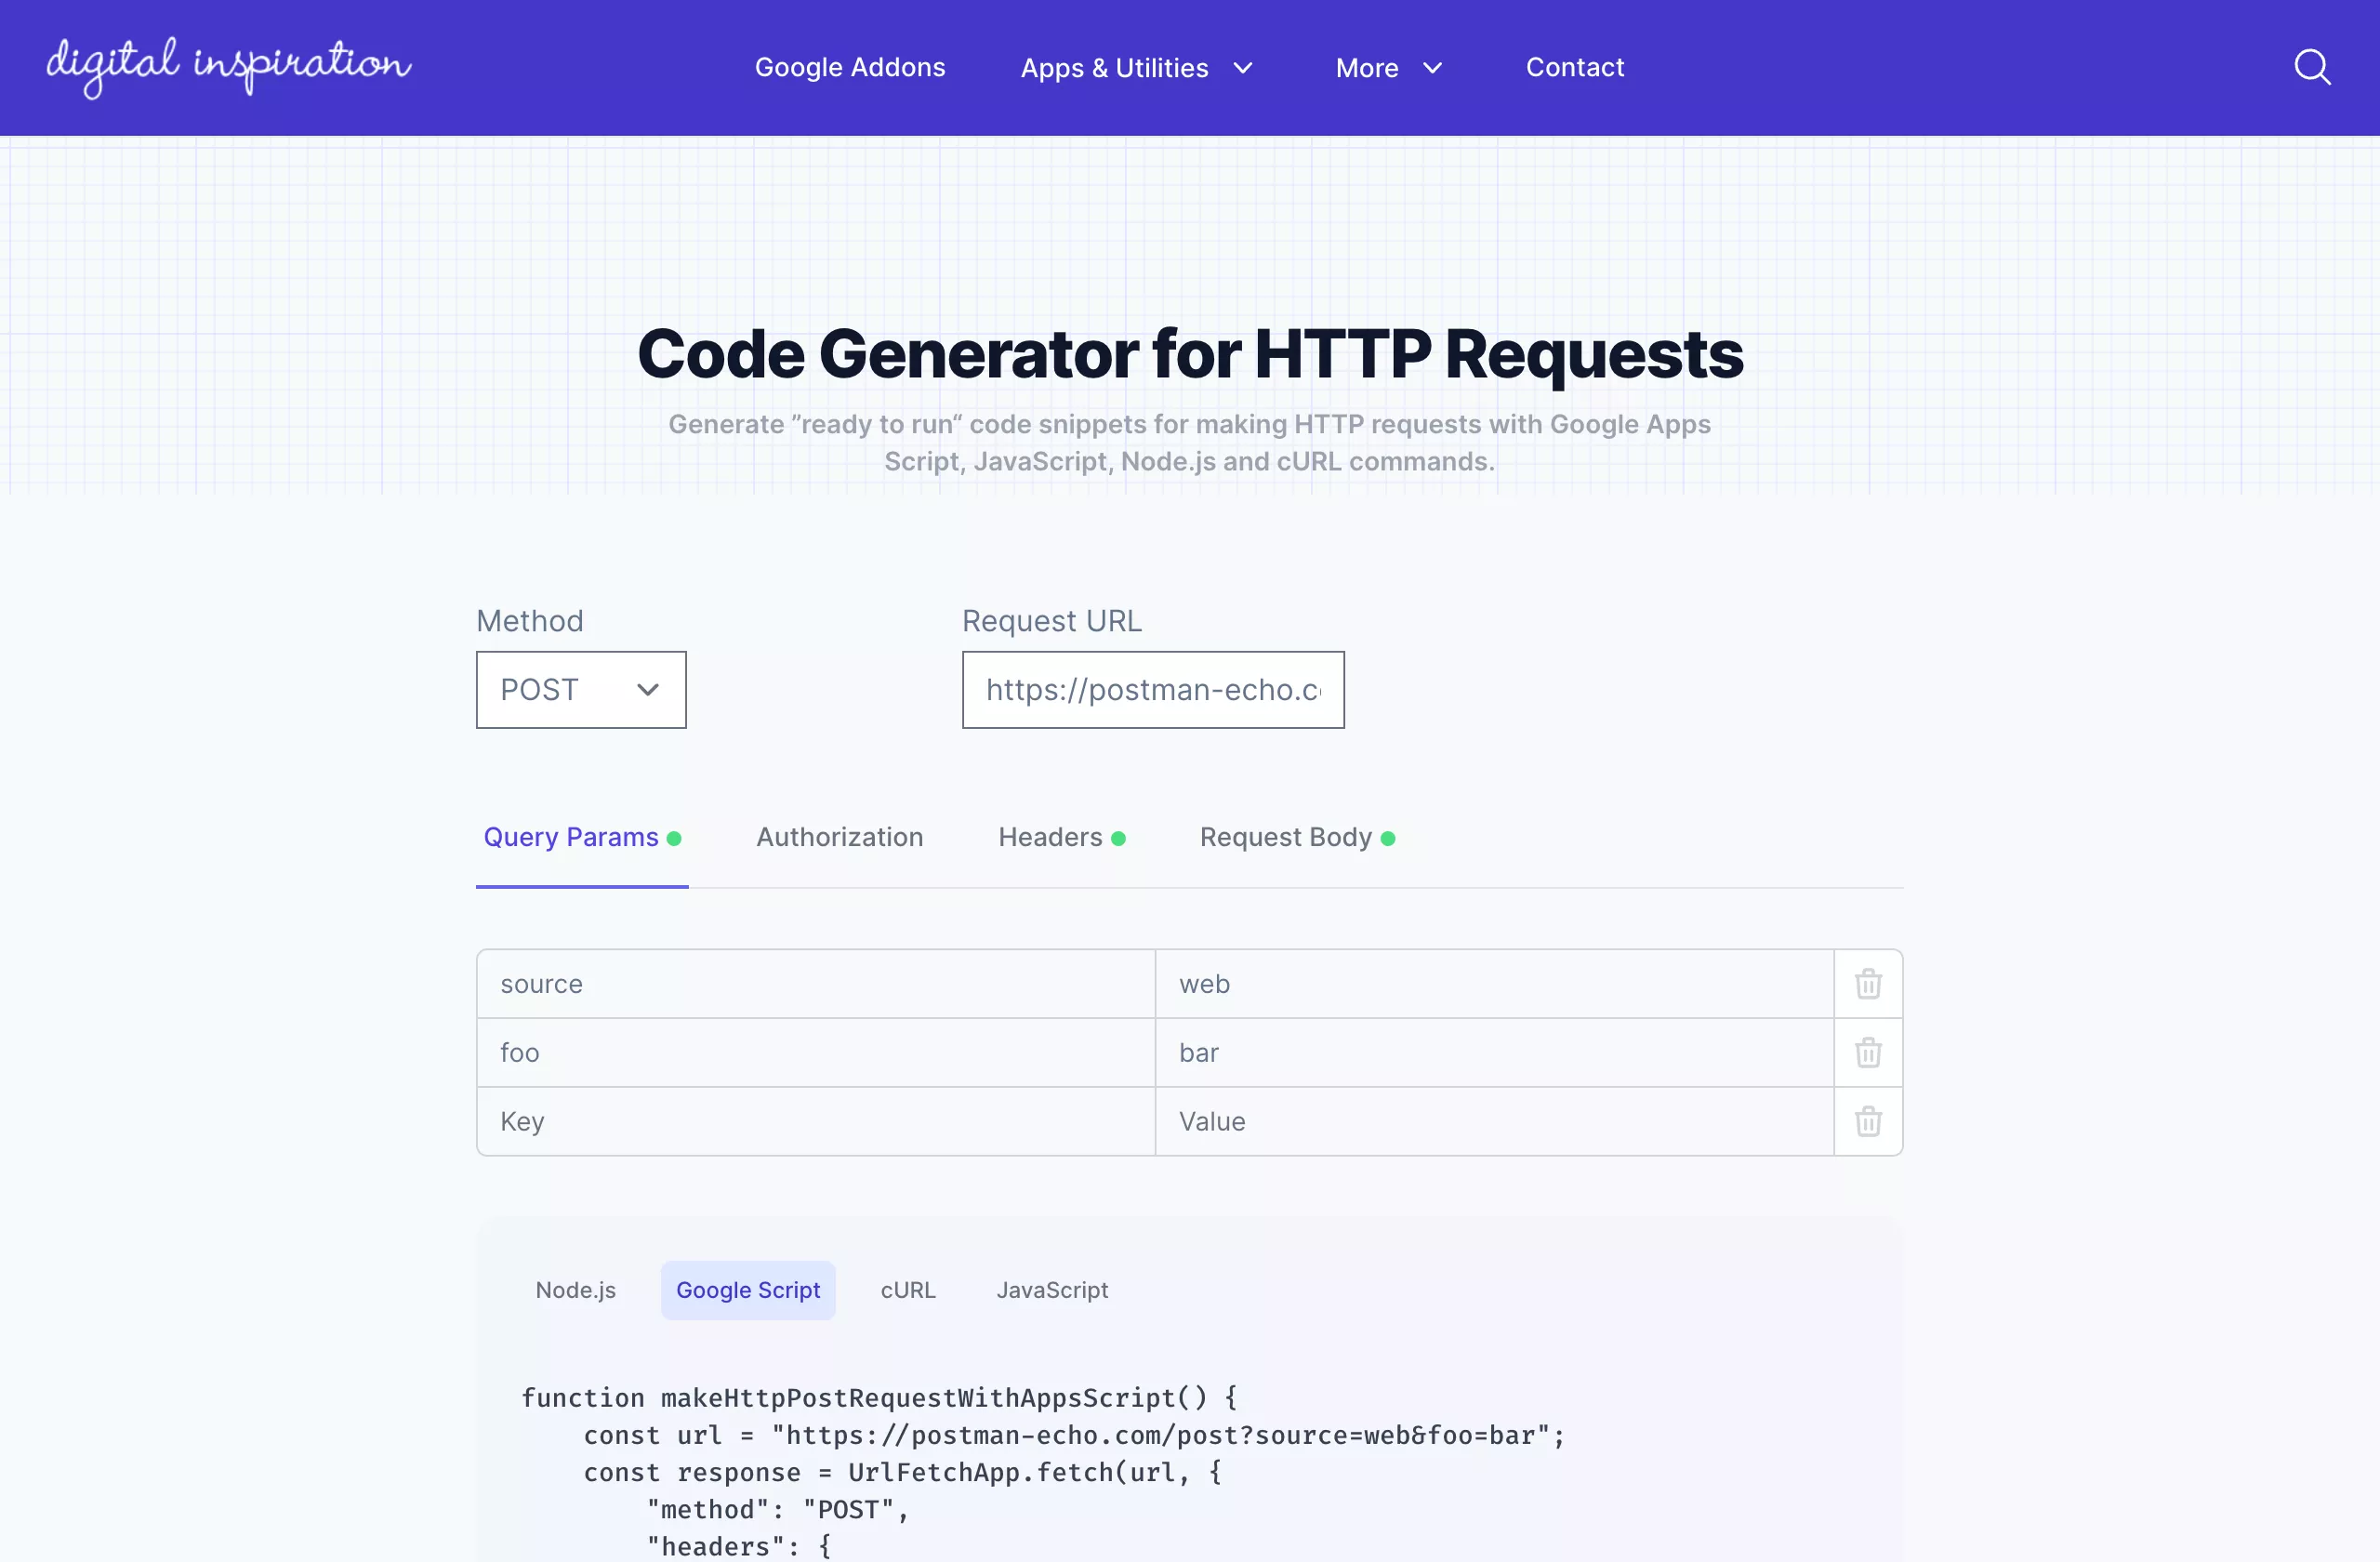 Code Generator for HTTP Requests